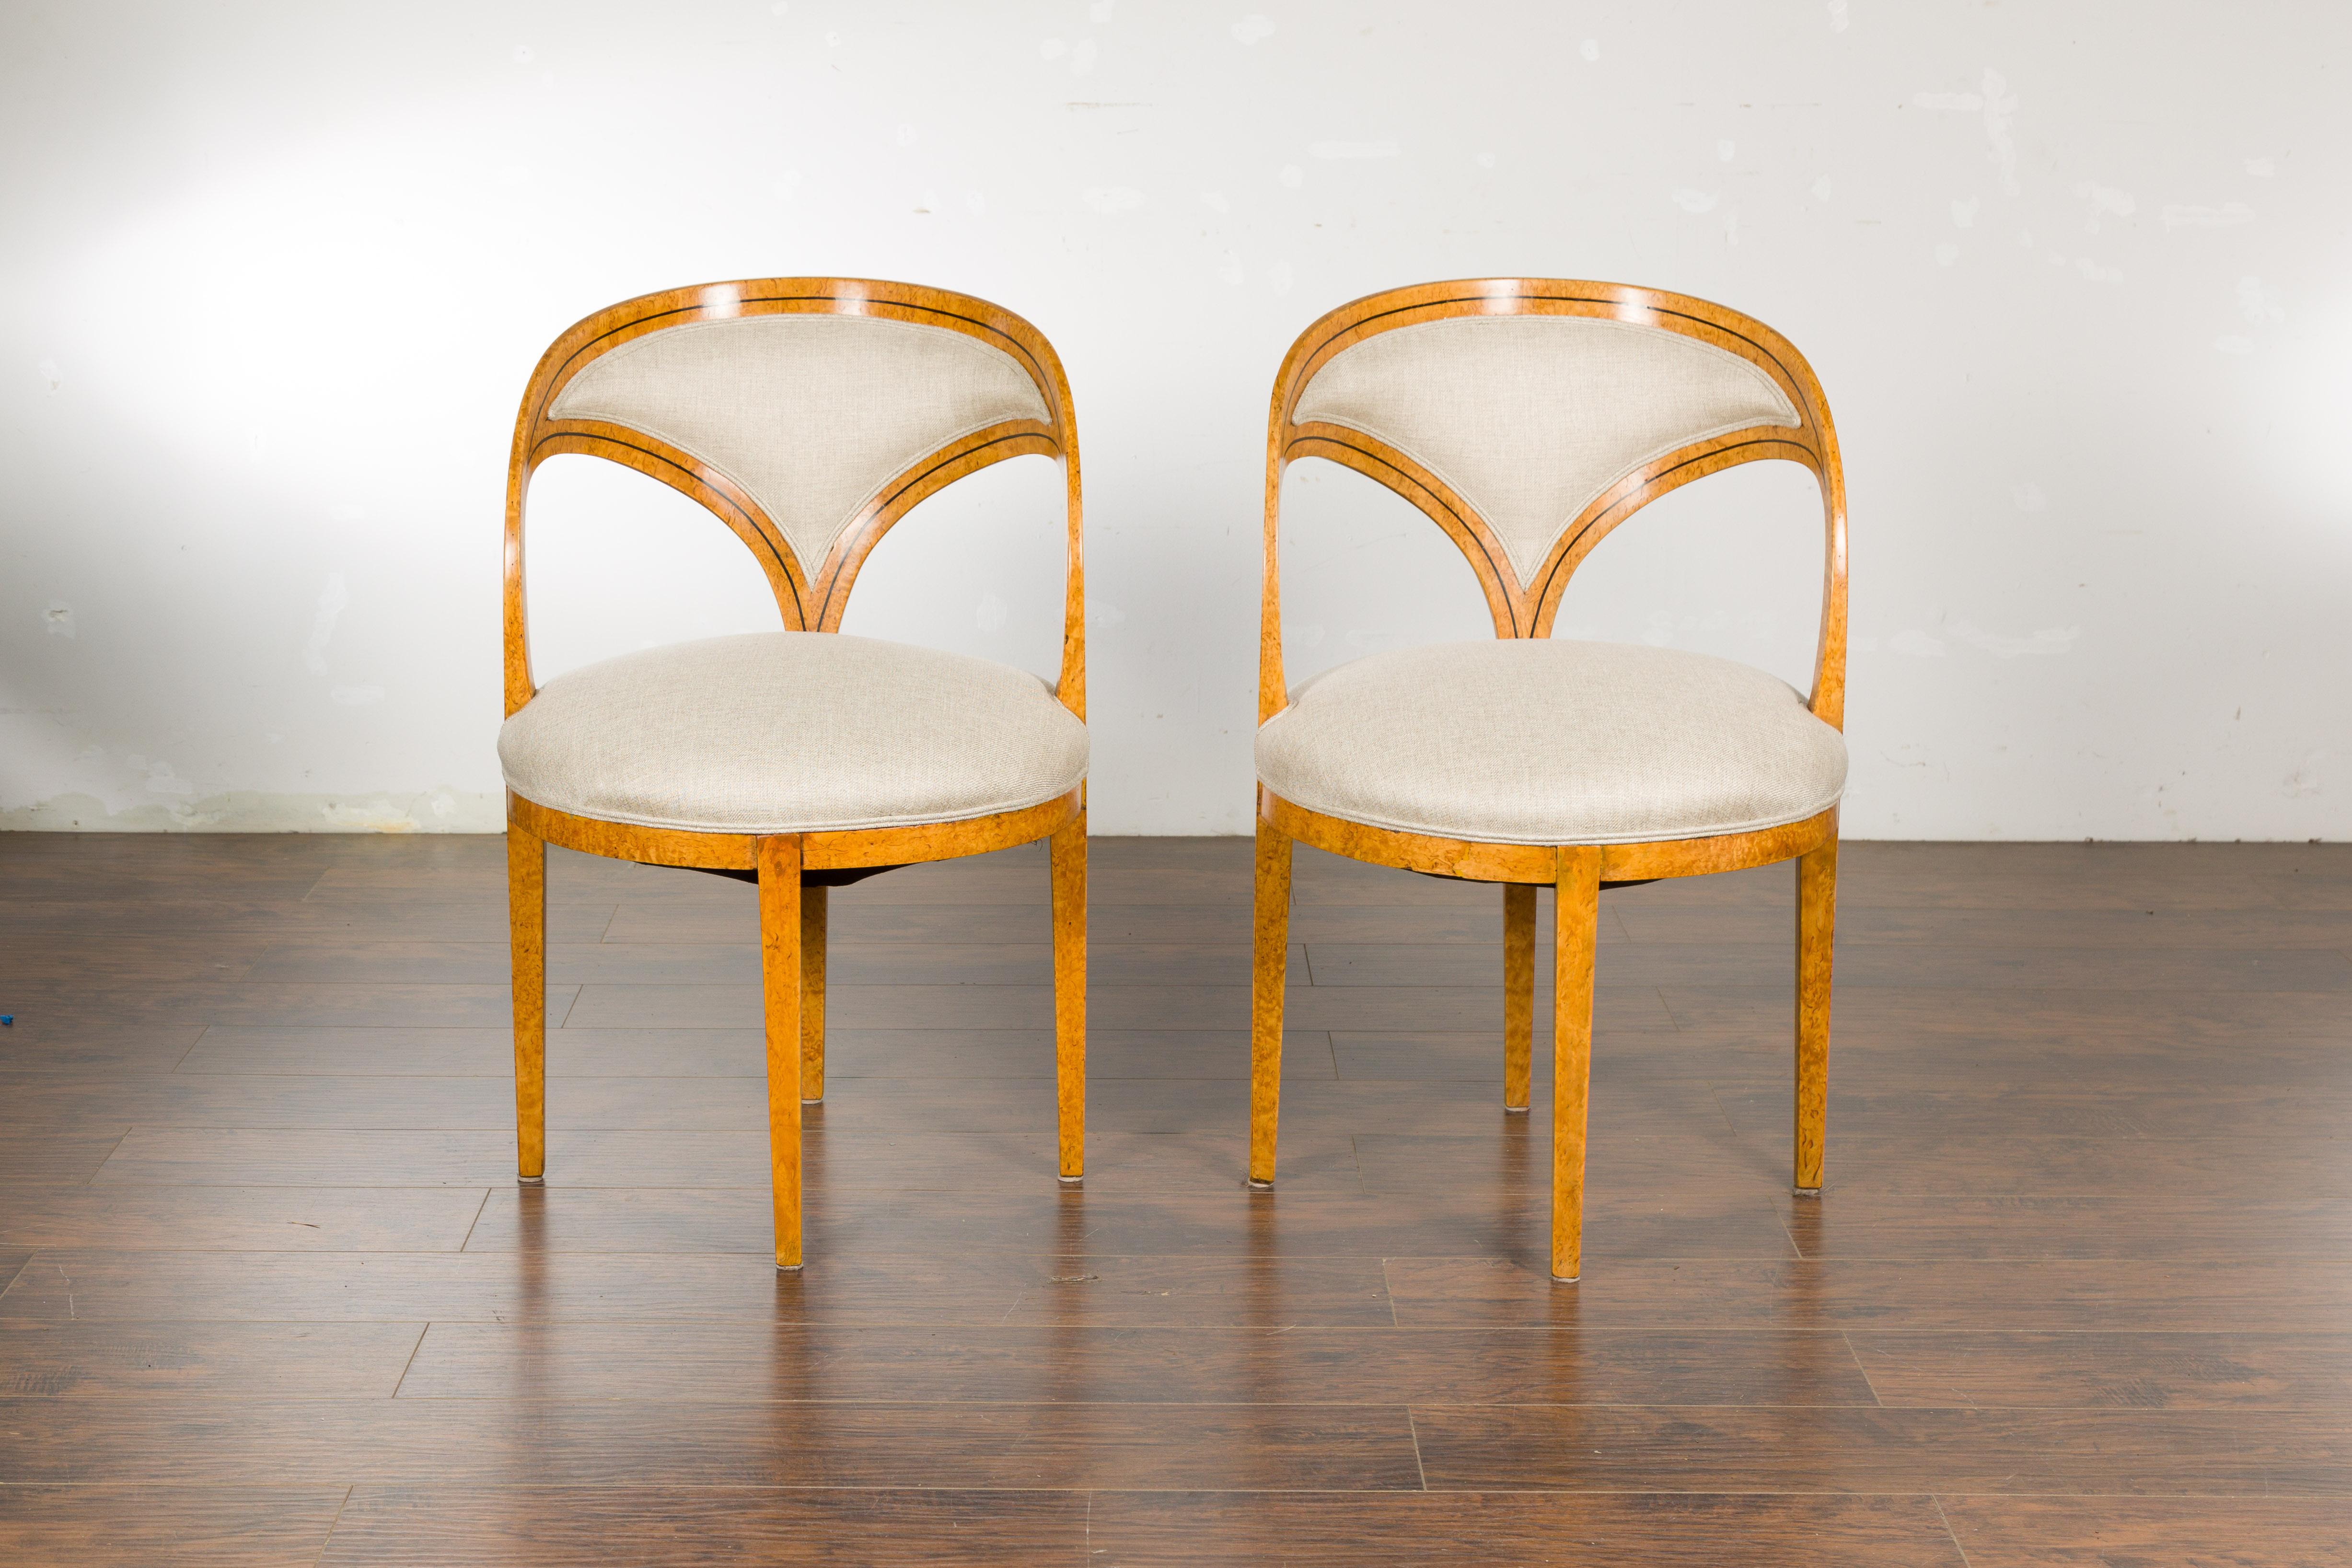 Austrian Biedermeier 19th Century Chairs with Ebonized Accents and New Upholstery, a Pair For Sale